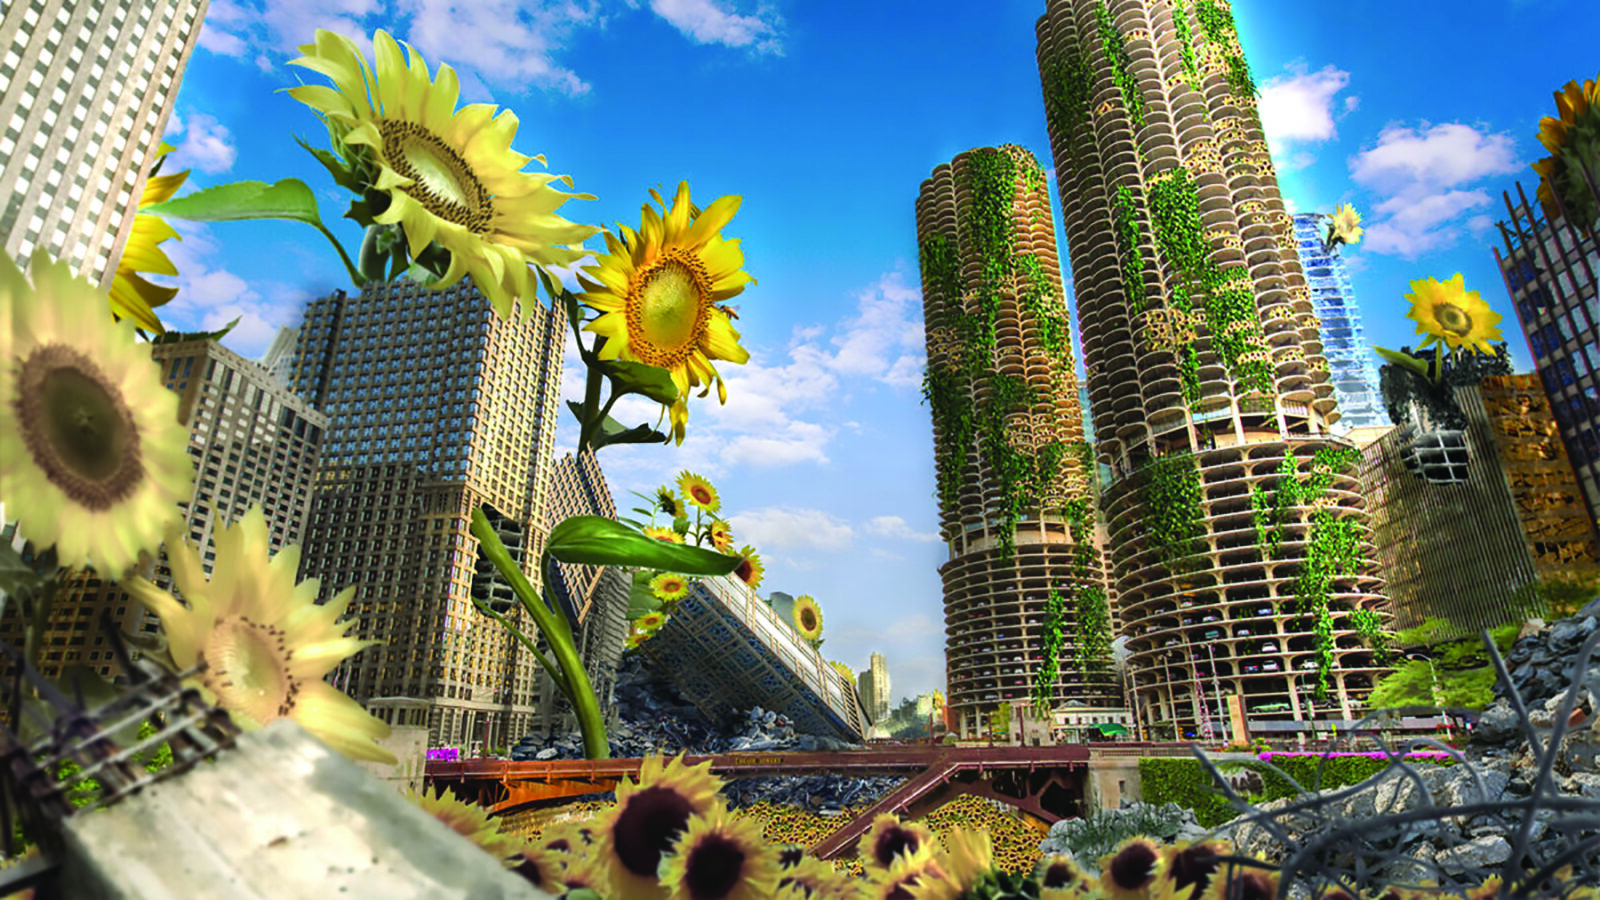 student work with sunflowers and high-rise buildings